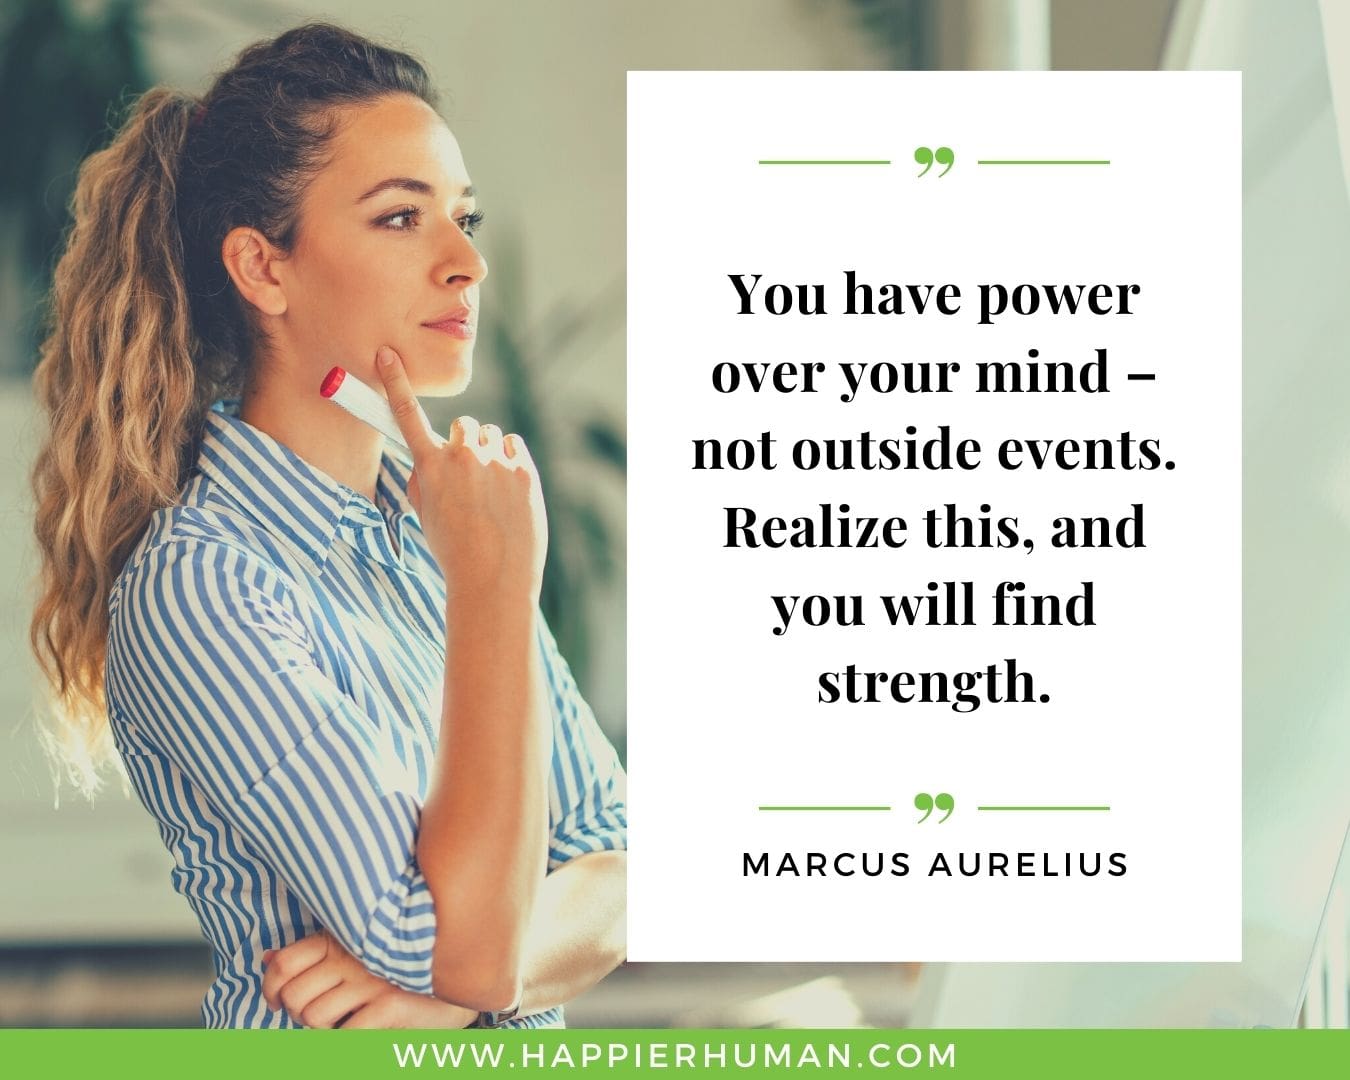 Overthinking Quotes - "You have power over your mind – not outside events. Realize this, and you will find strength." - Marcus Aurelius.